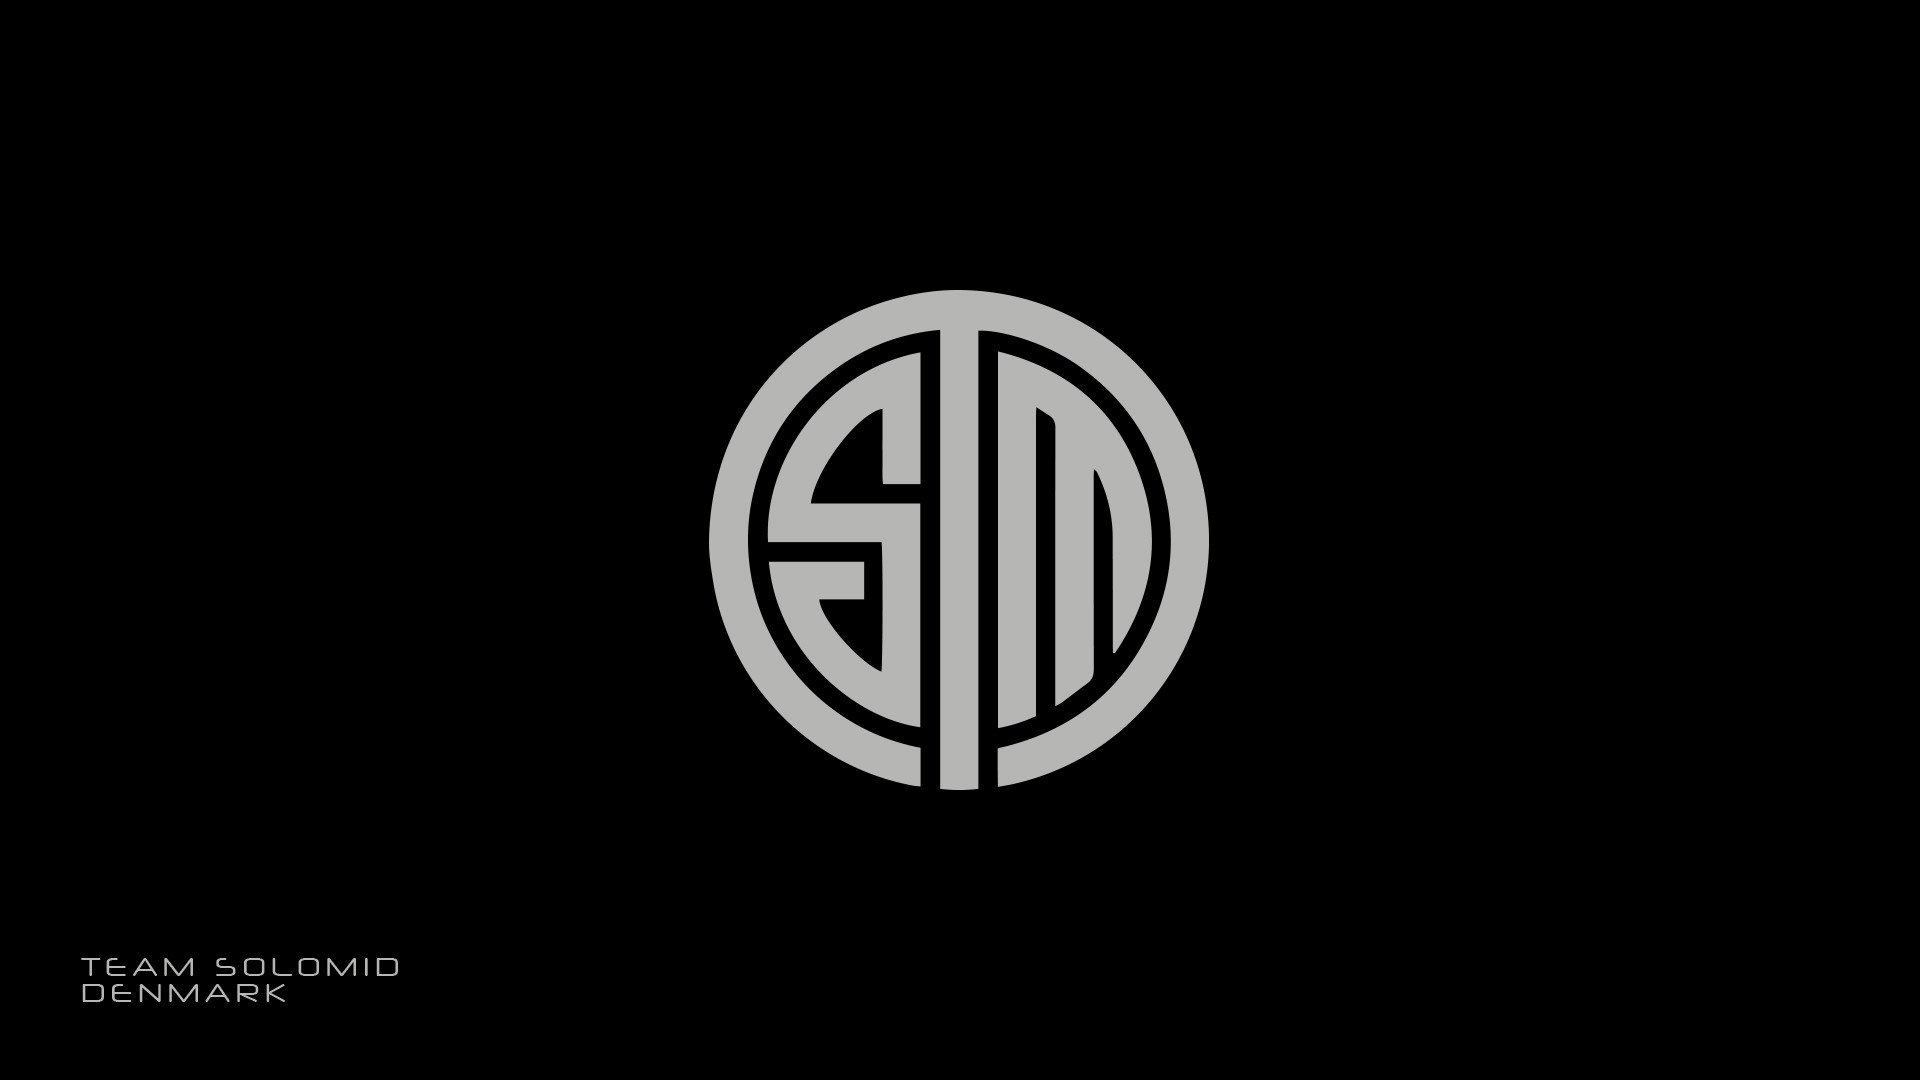 Saw this on / r / globaloffensive with some cool CSGO team wallpapers. There are 2 wallpapers with TSM on you should check